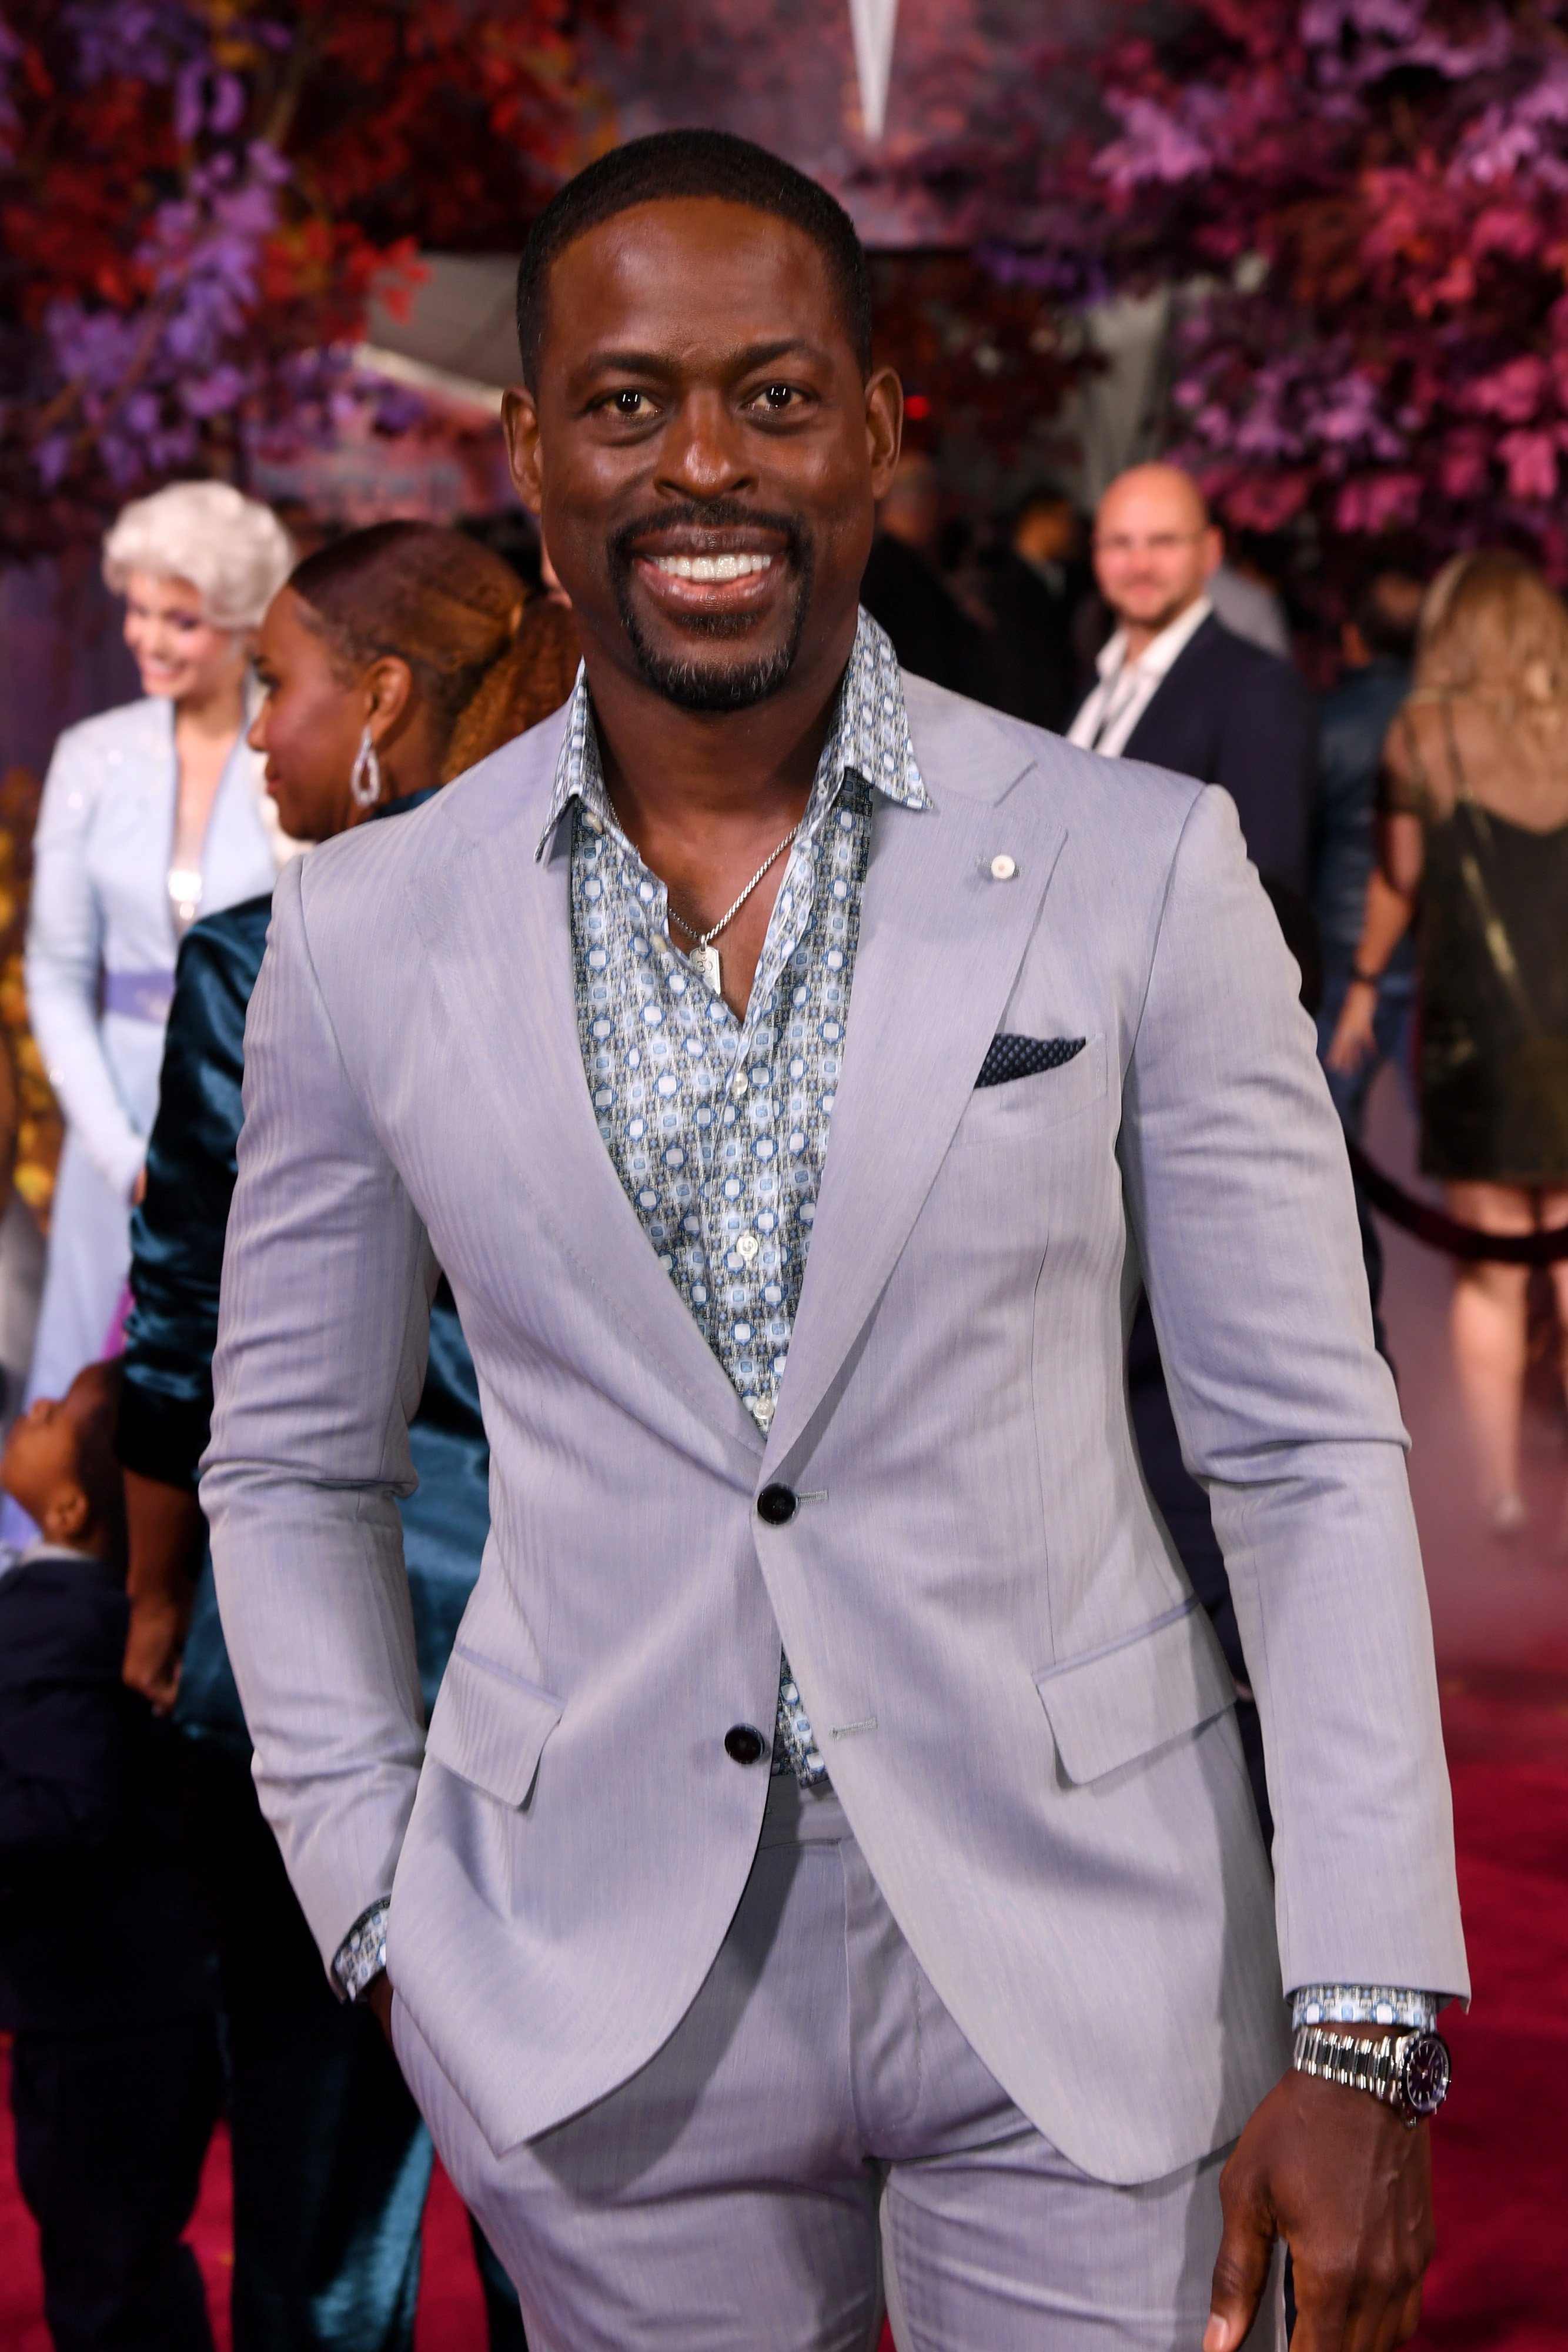 Sterling K. Brown at the premiere of "Frozen 2" on Nov. 07, 2019 in California | Photo: Getty Images